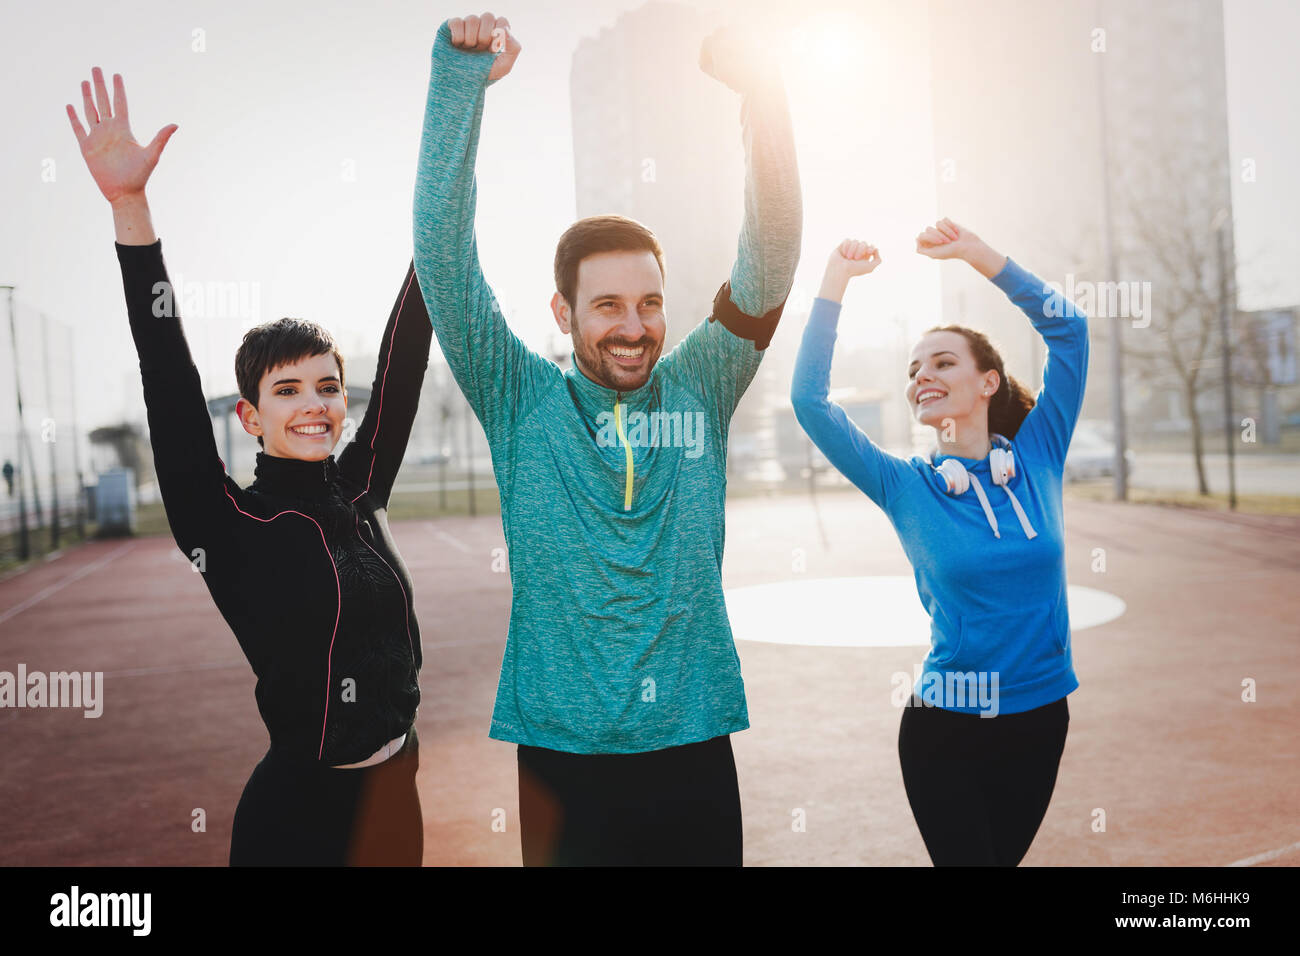 Friends fitness training together outdoors living active healthy Stock Photo